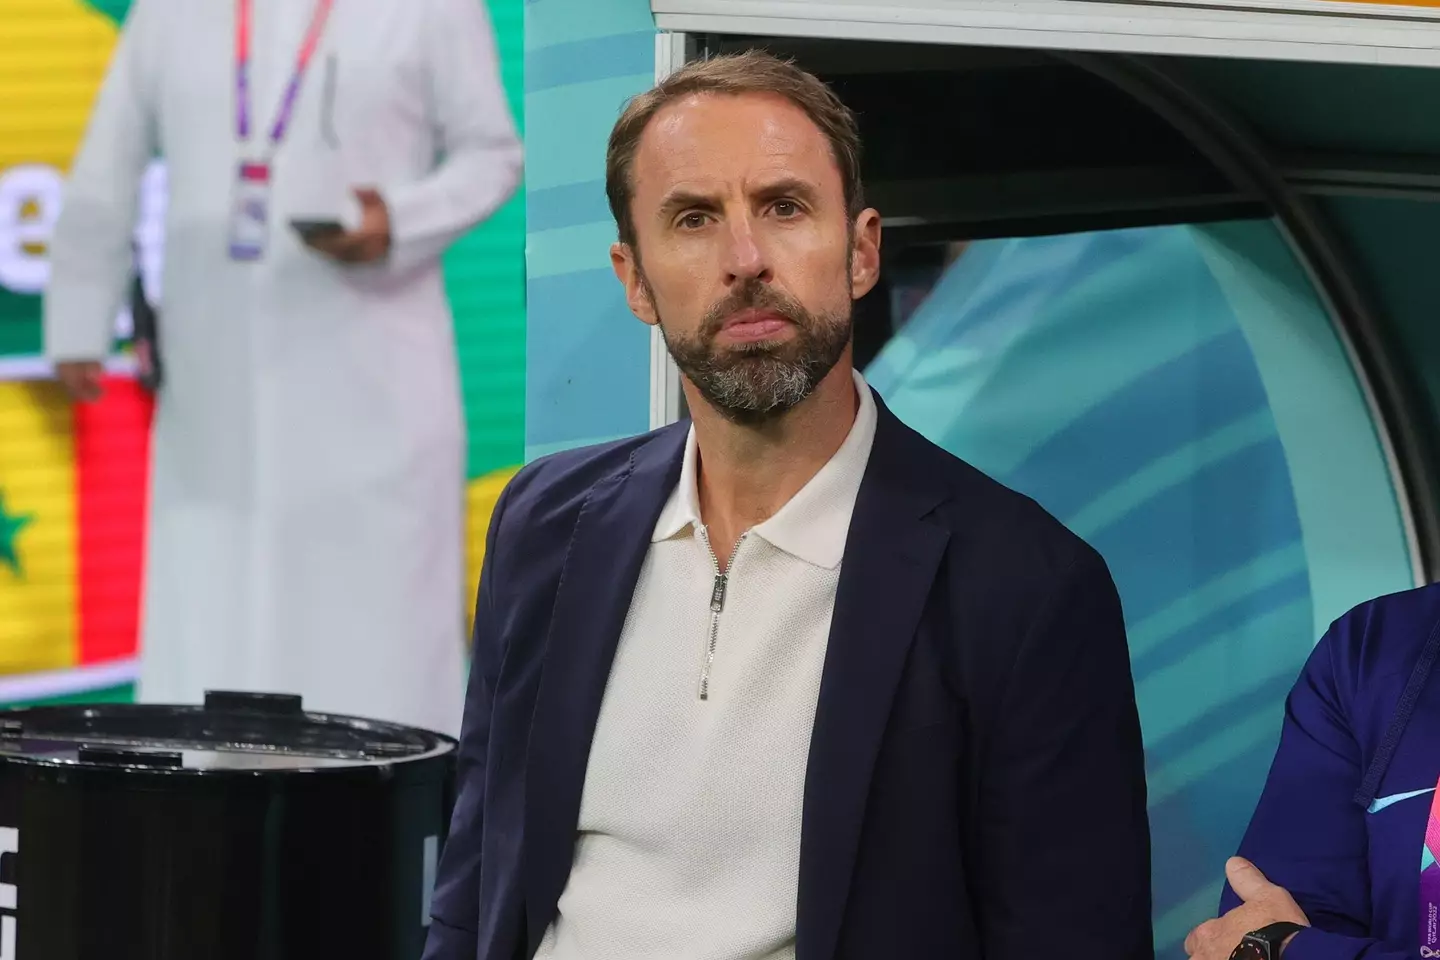 Gareth Southgate’s England side are predicted, by the supercomputer, to fall at the hands of 2018 World Cup champions France.